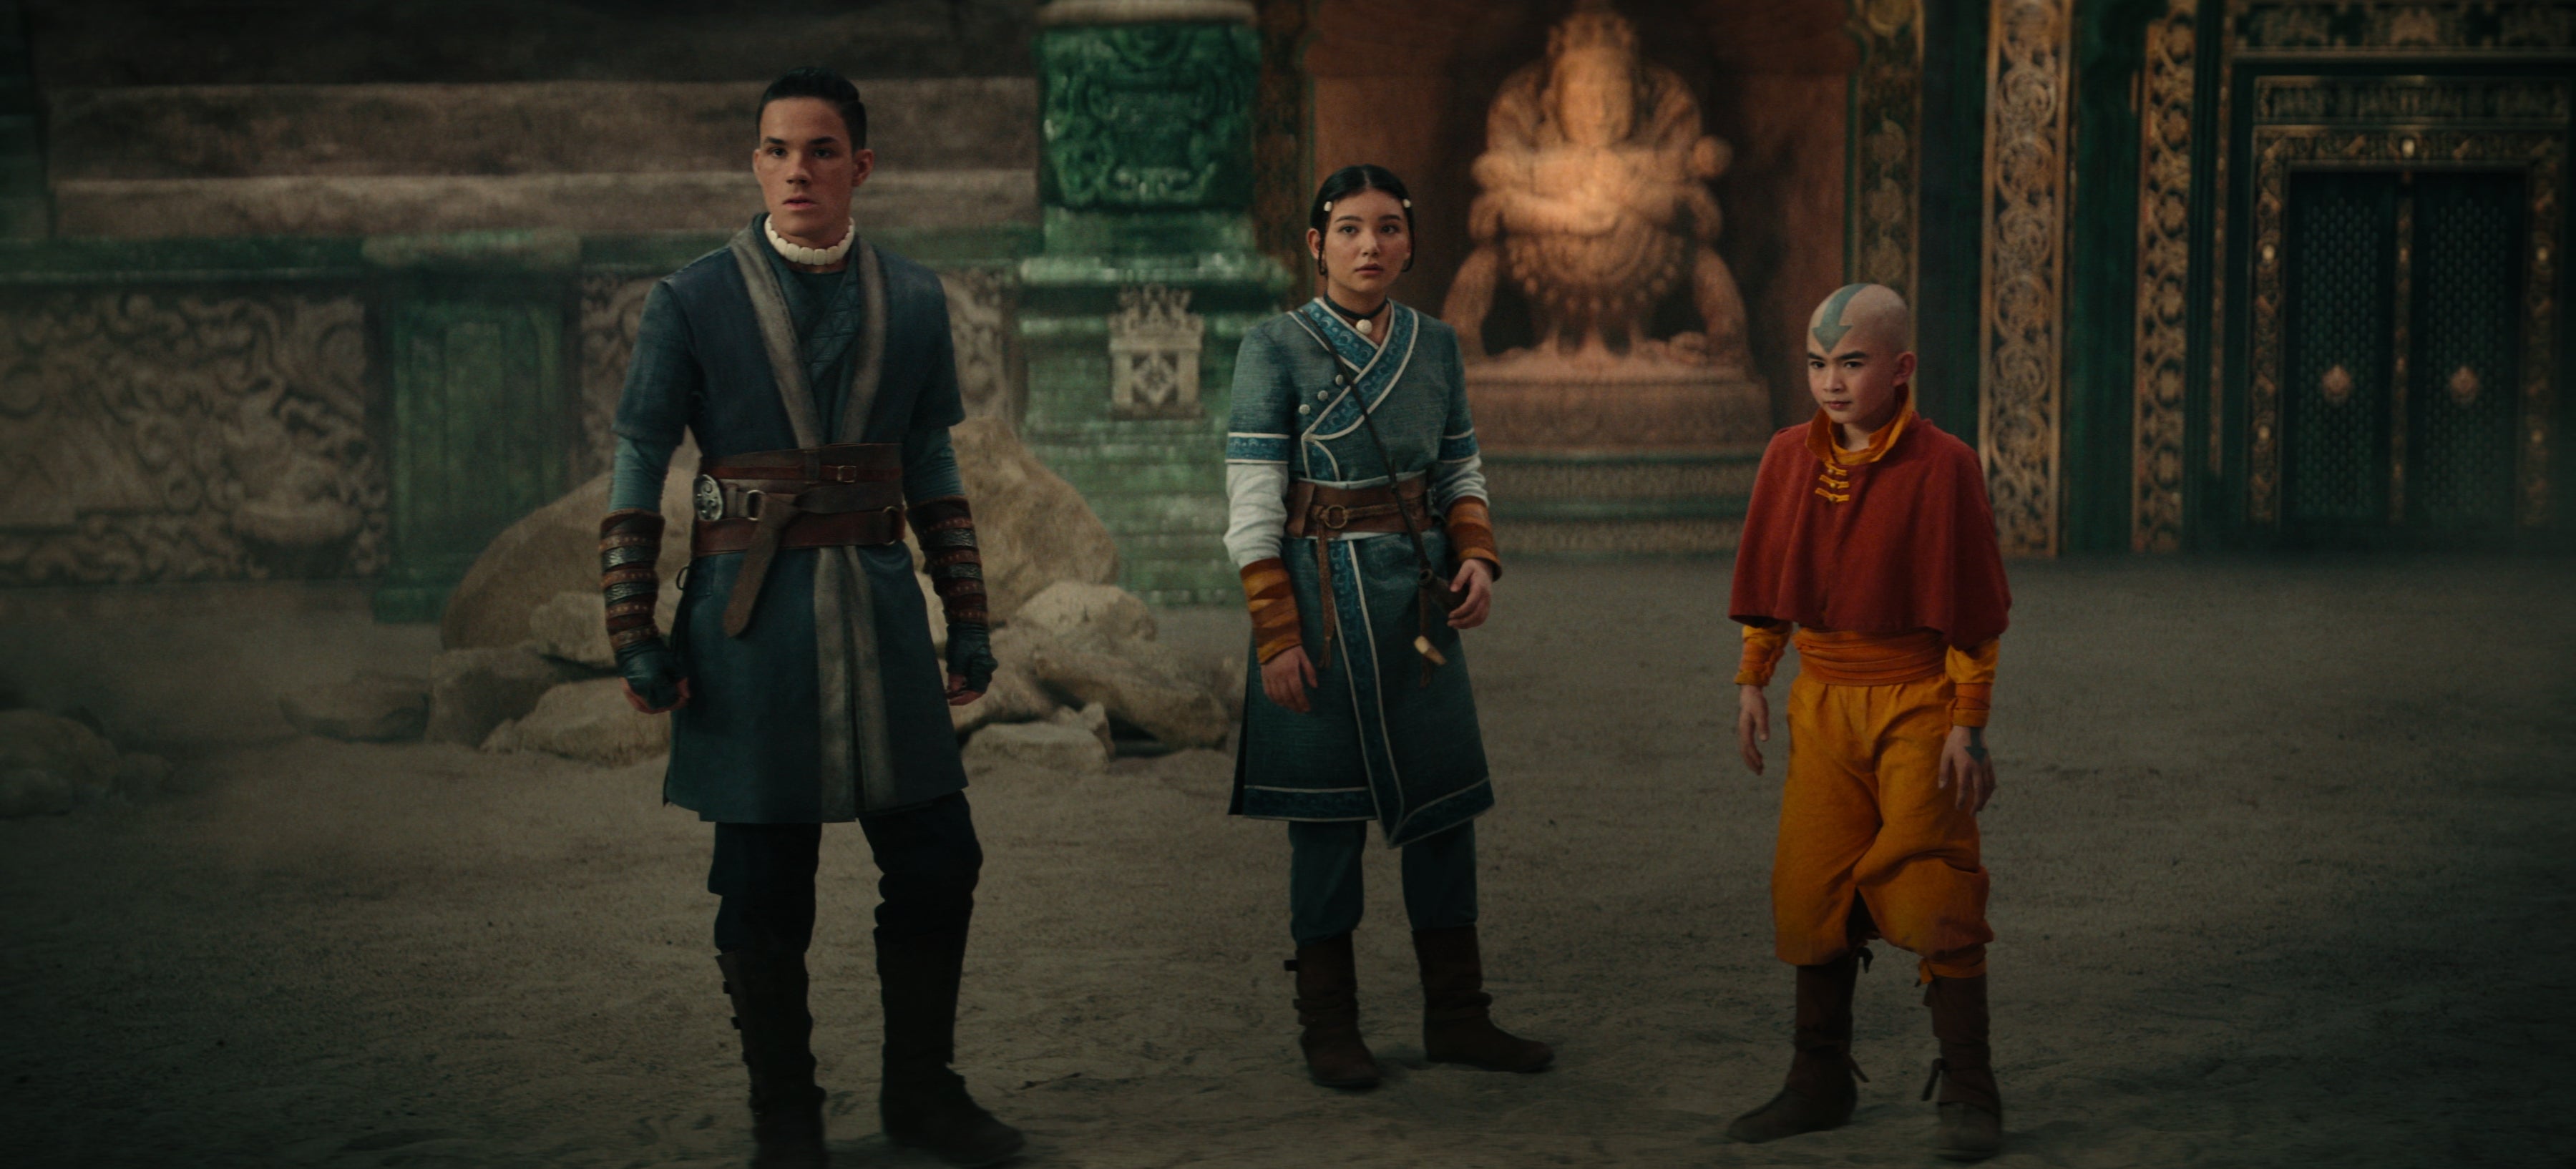 Avatar: The Last Airbender Live Action Trailer Images